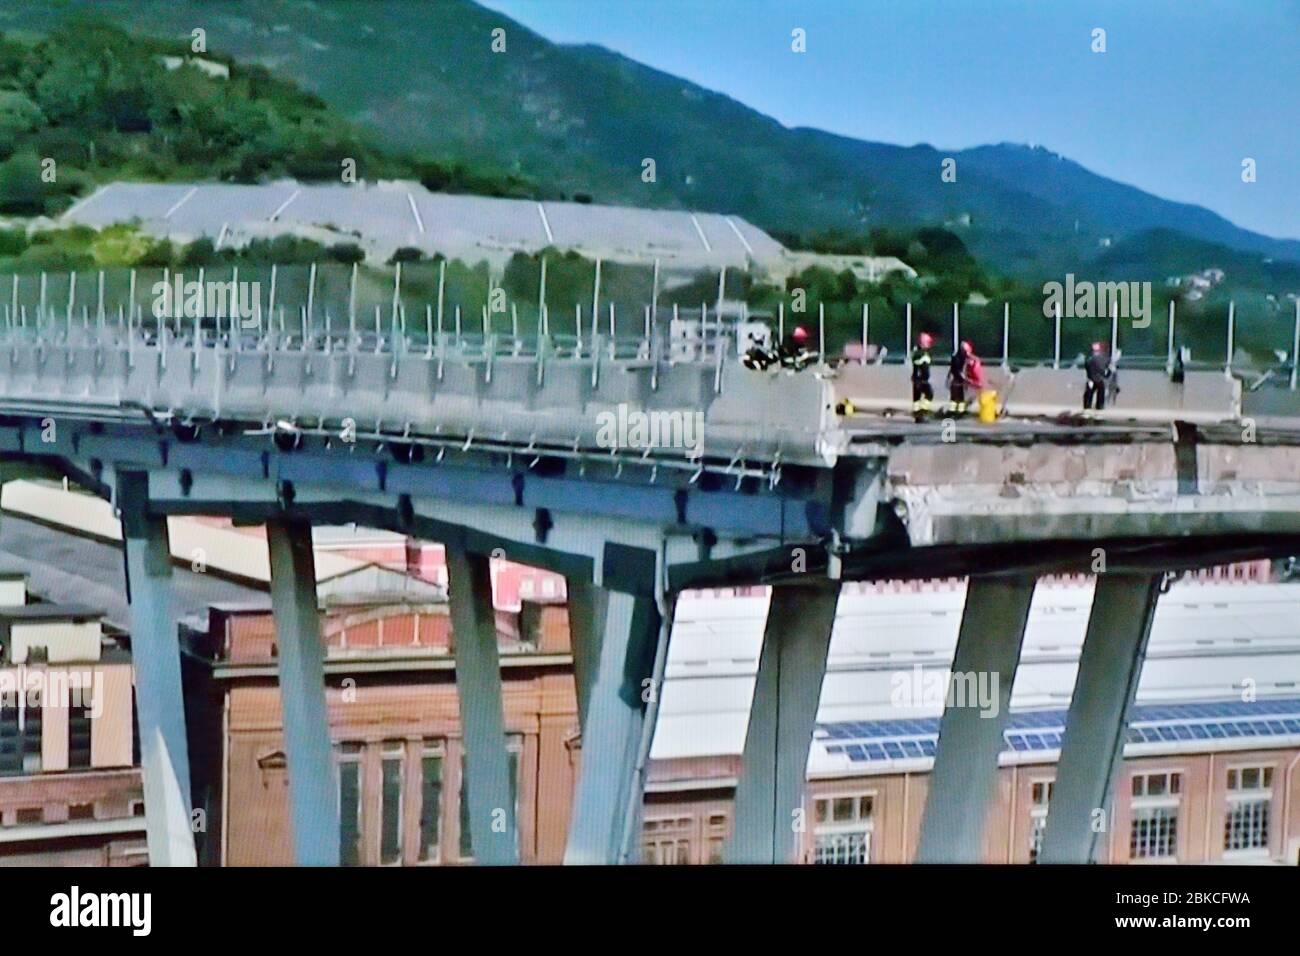 Genoa, Italy, detail of the collapsed Morandi Bridge with firefighters (polcevera viaduct), A10 motorway after structural failure causing 43 casualties -  August 14th 2018 Stock Photo